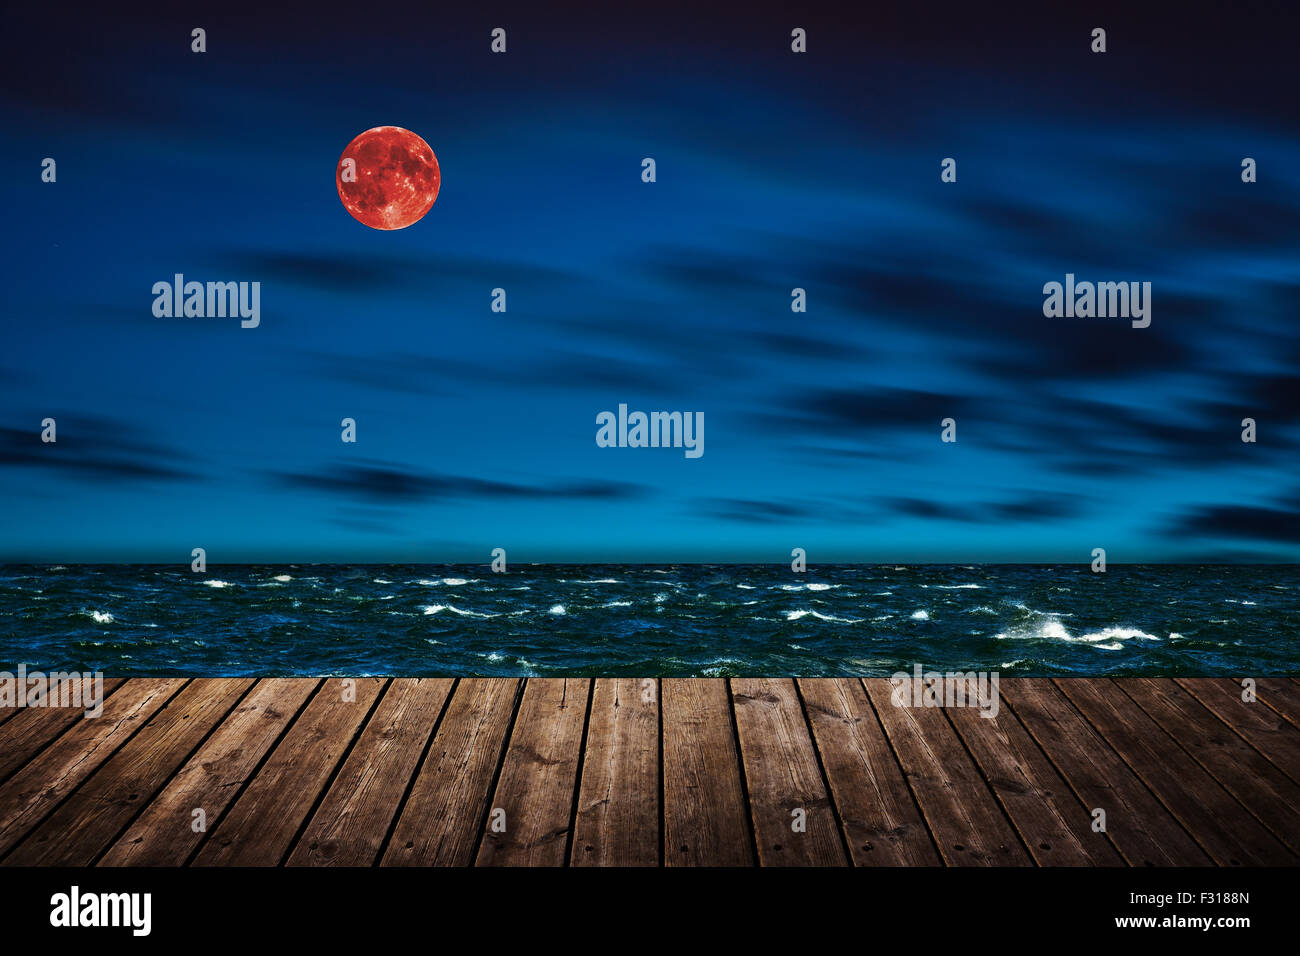 Red full moon in red color also called bloodmoon on the background sea. Stock Photo